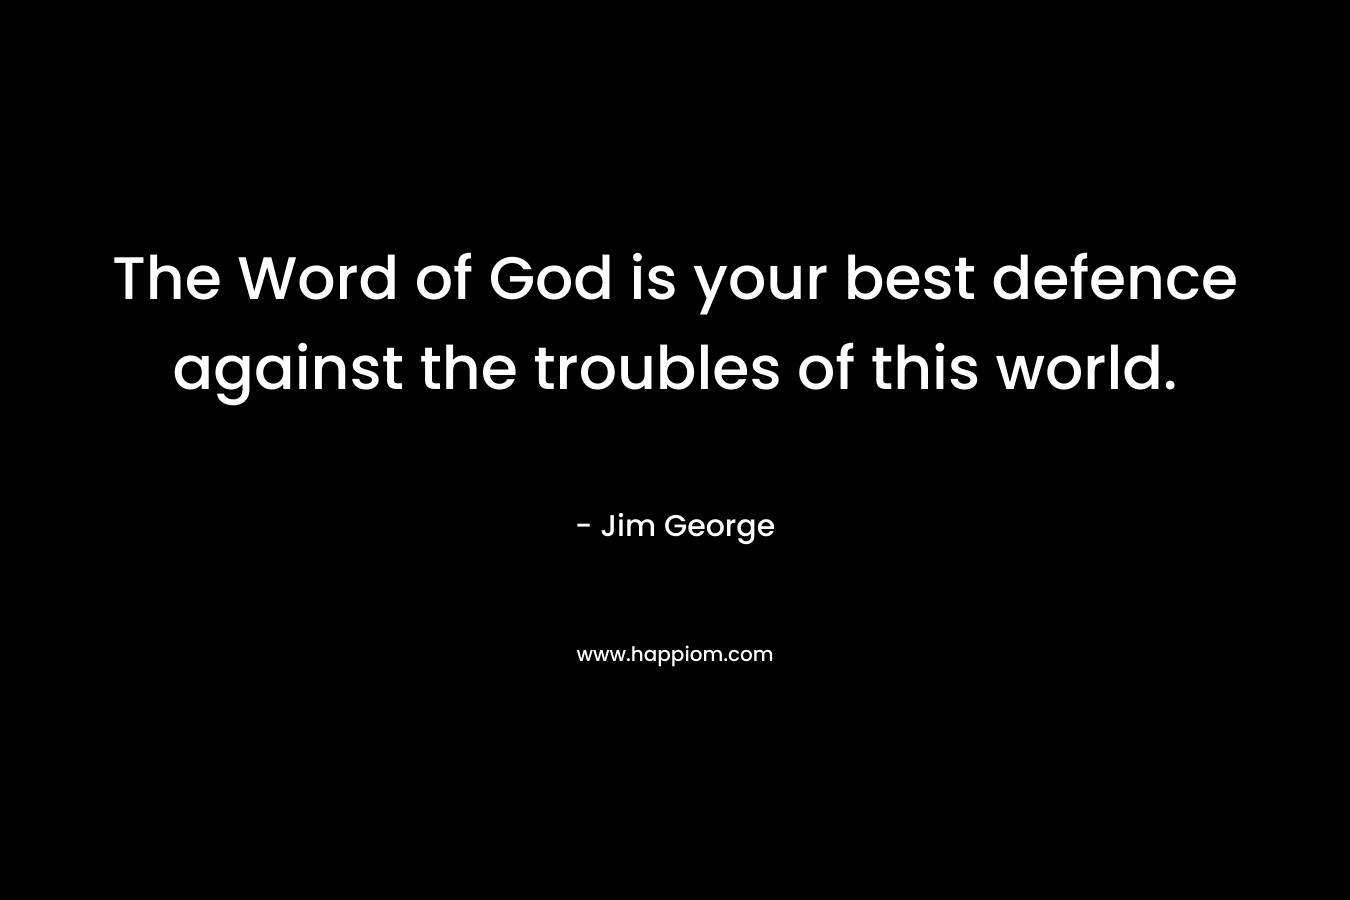 The Word of God is your best defence against the troubles of this world.